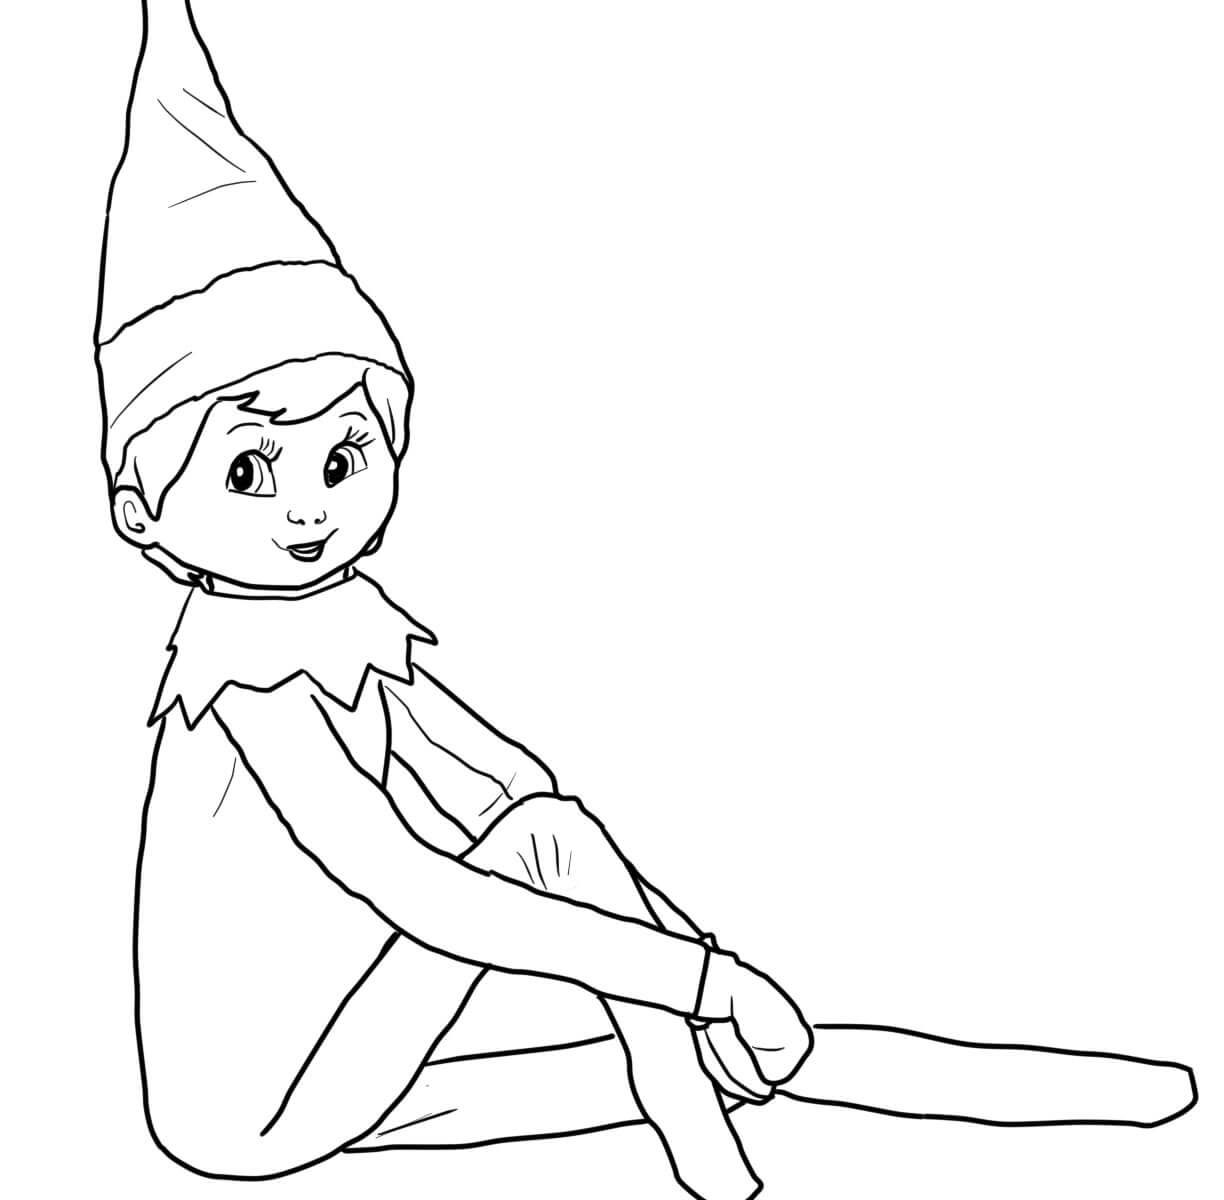 Coloring Pages Of Elves On Shelves Coloring Pages